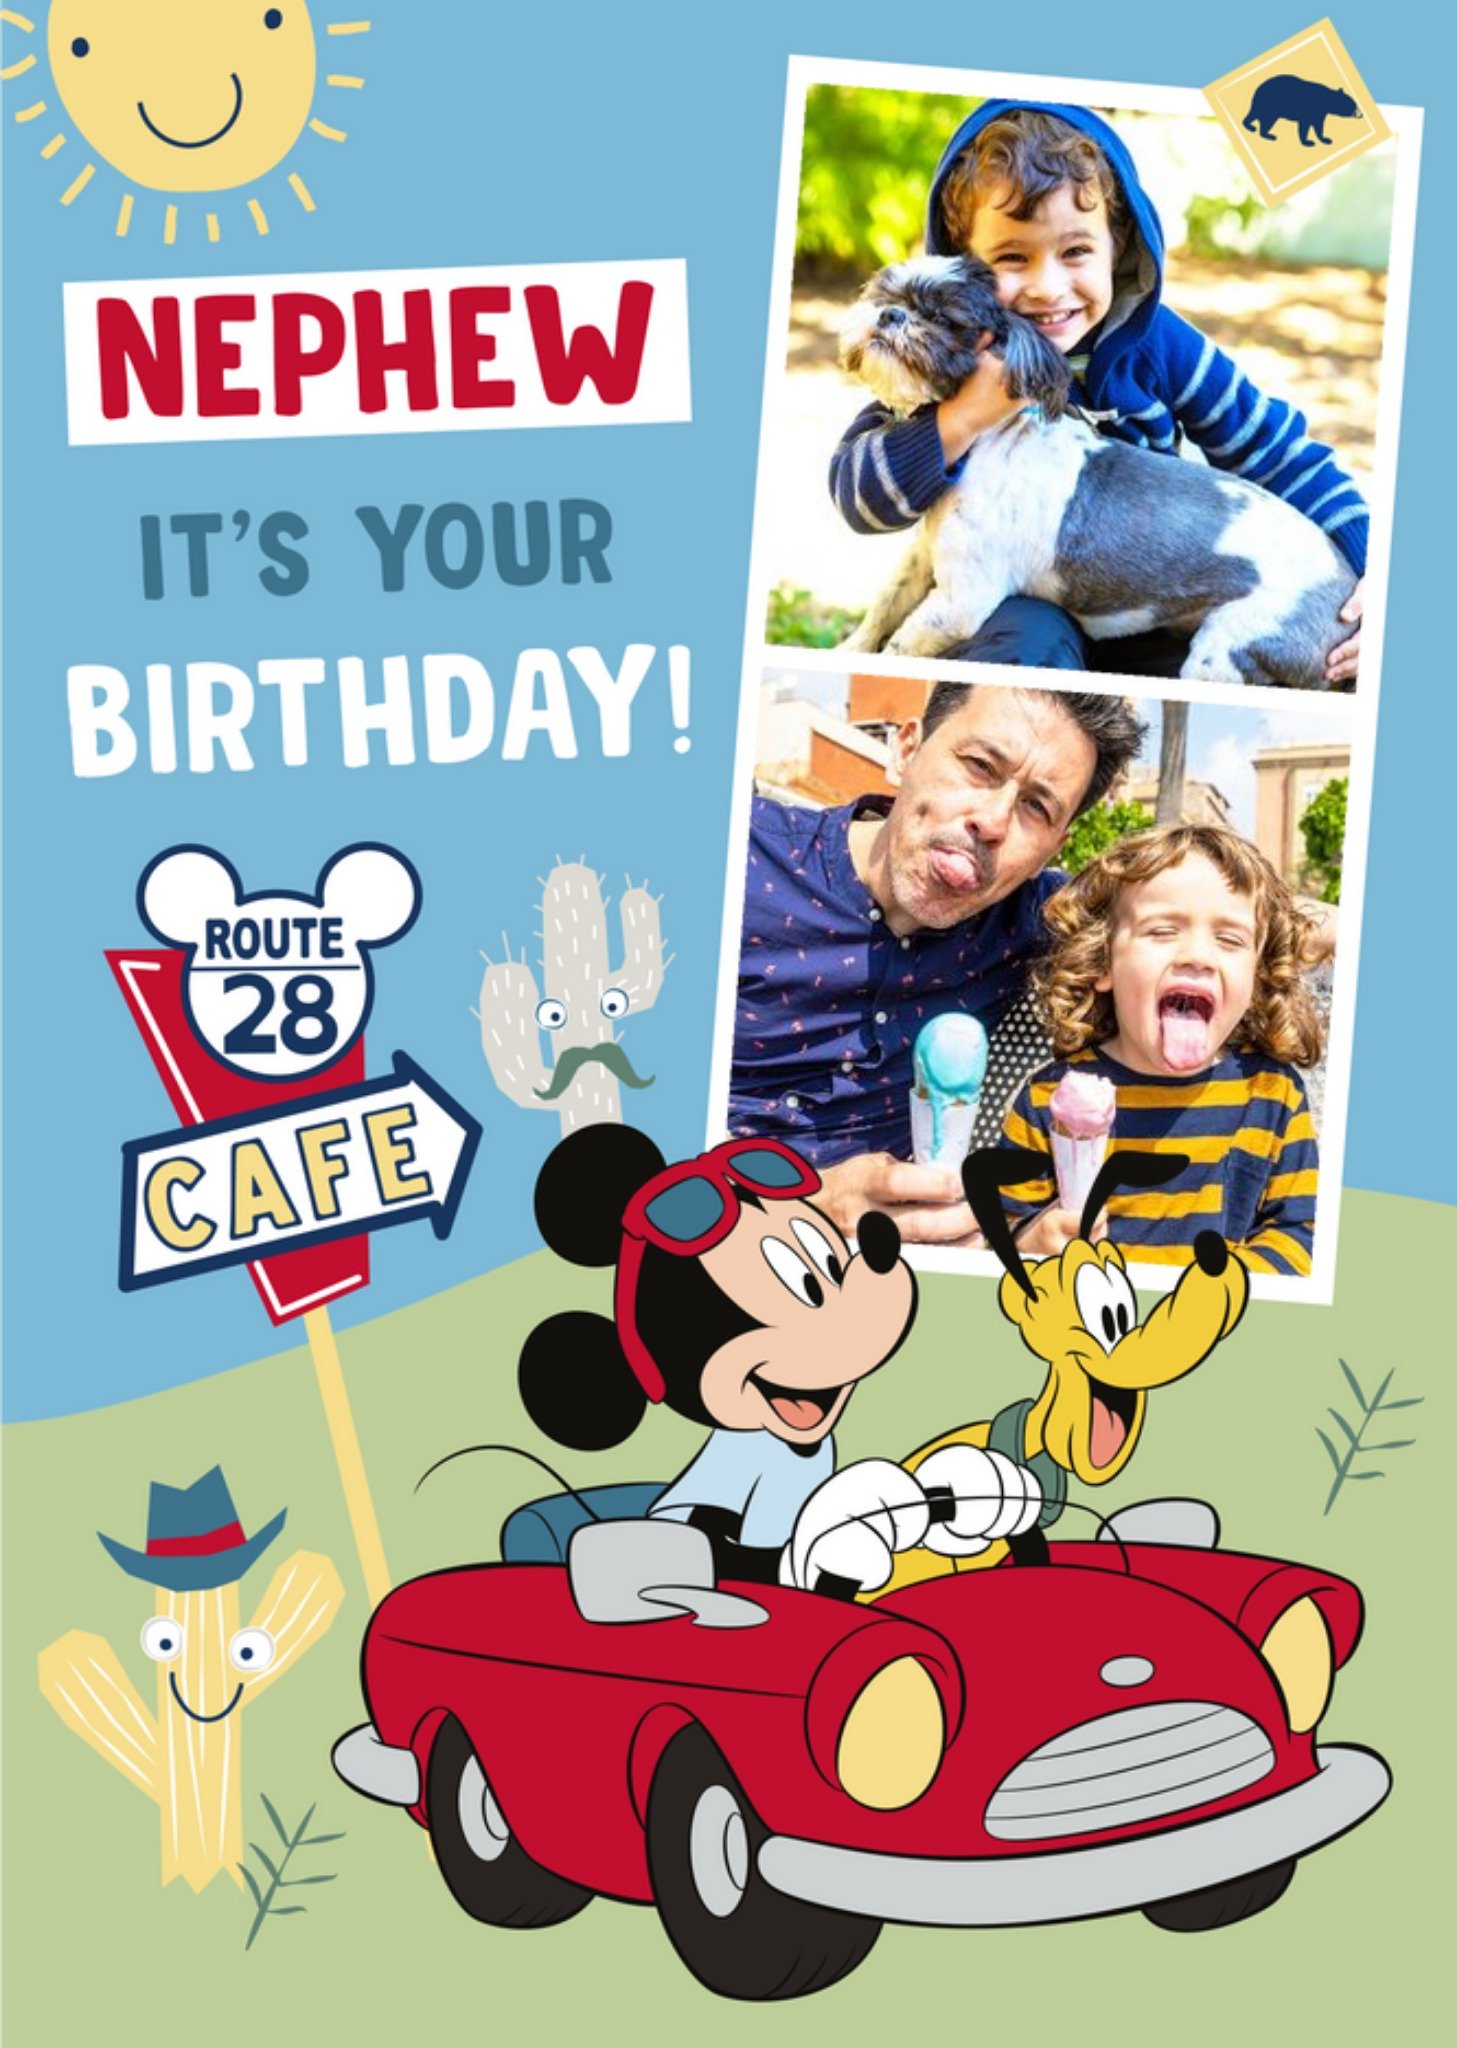 Disney Mickey Mouse And Pluto Photo Upload Nephew It's Your Birthday Card, Large